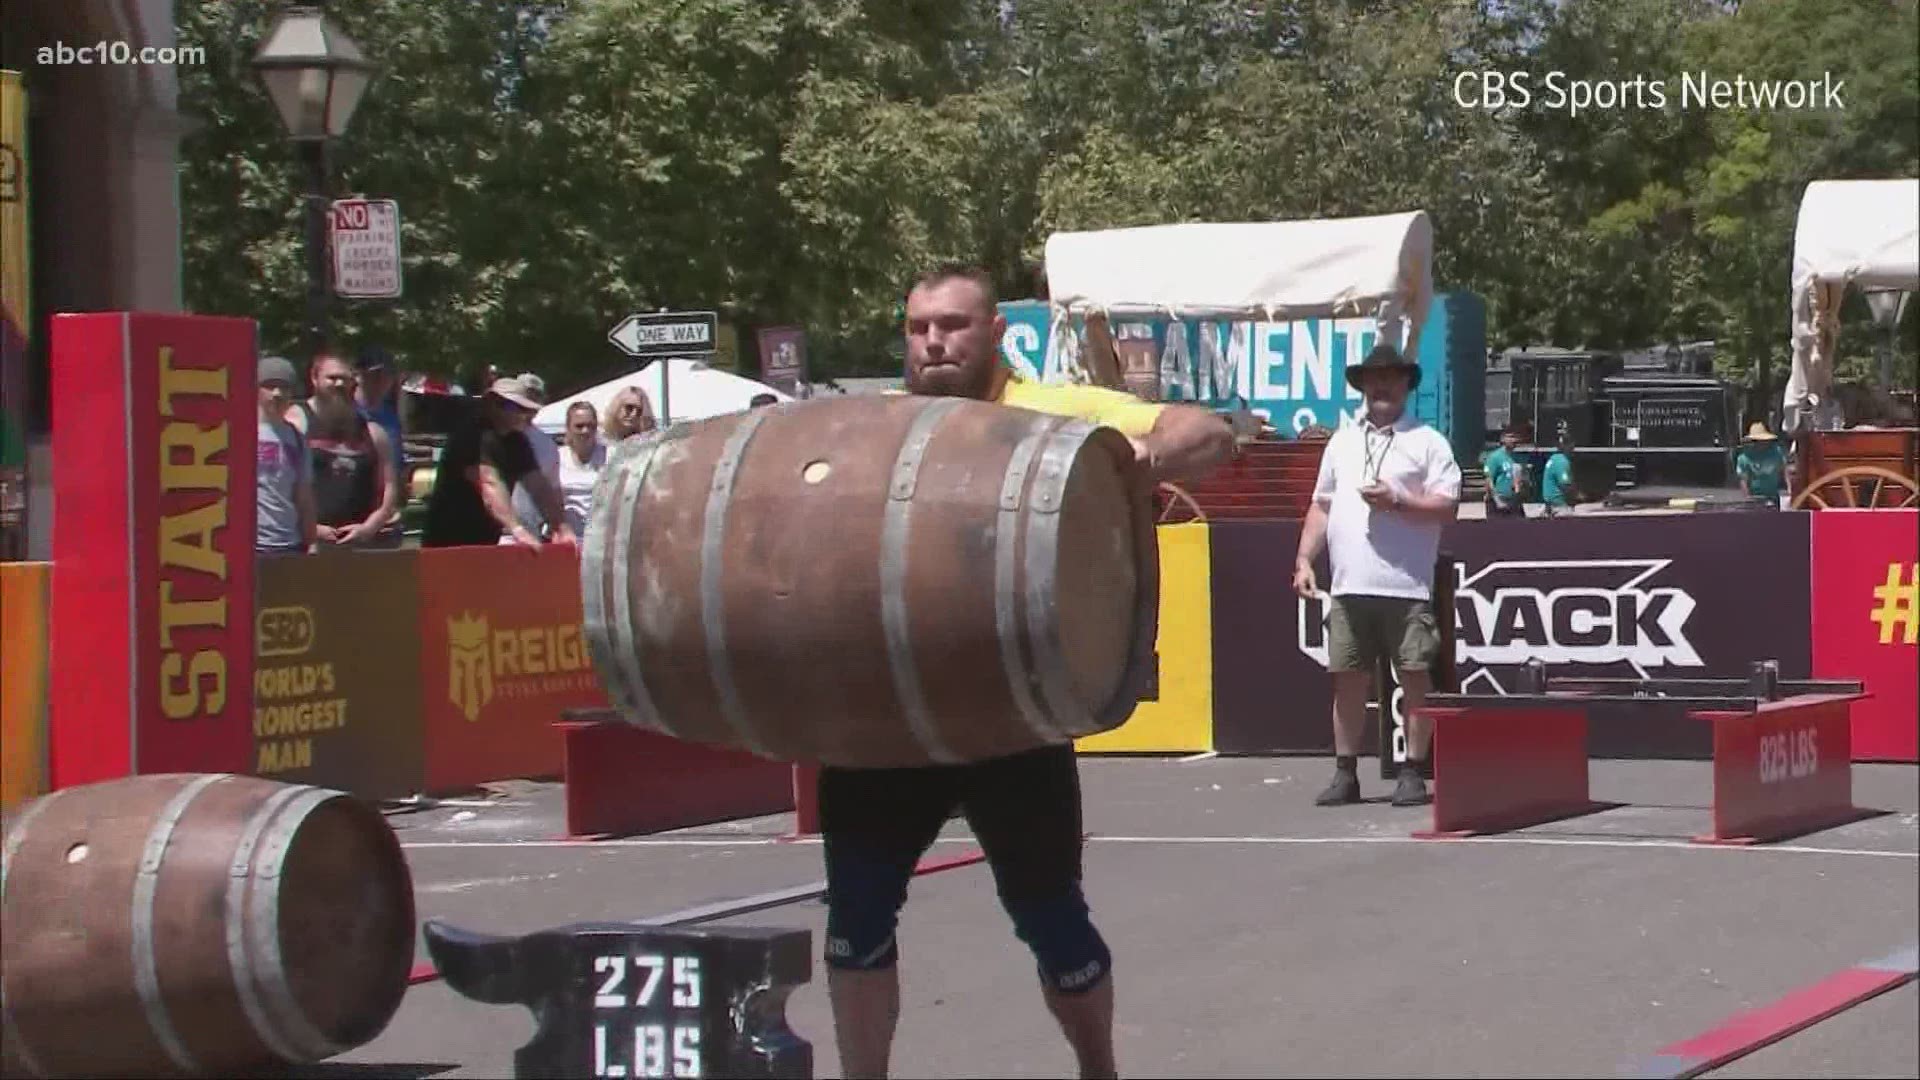 The World's Strongest Man competition staff has medical personnel on hand, are supplying water and making sure the athletes are safe.